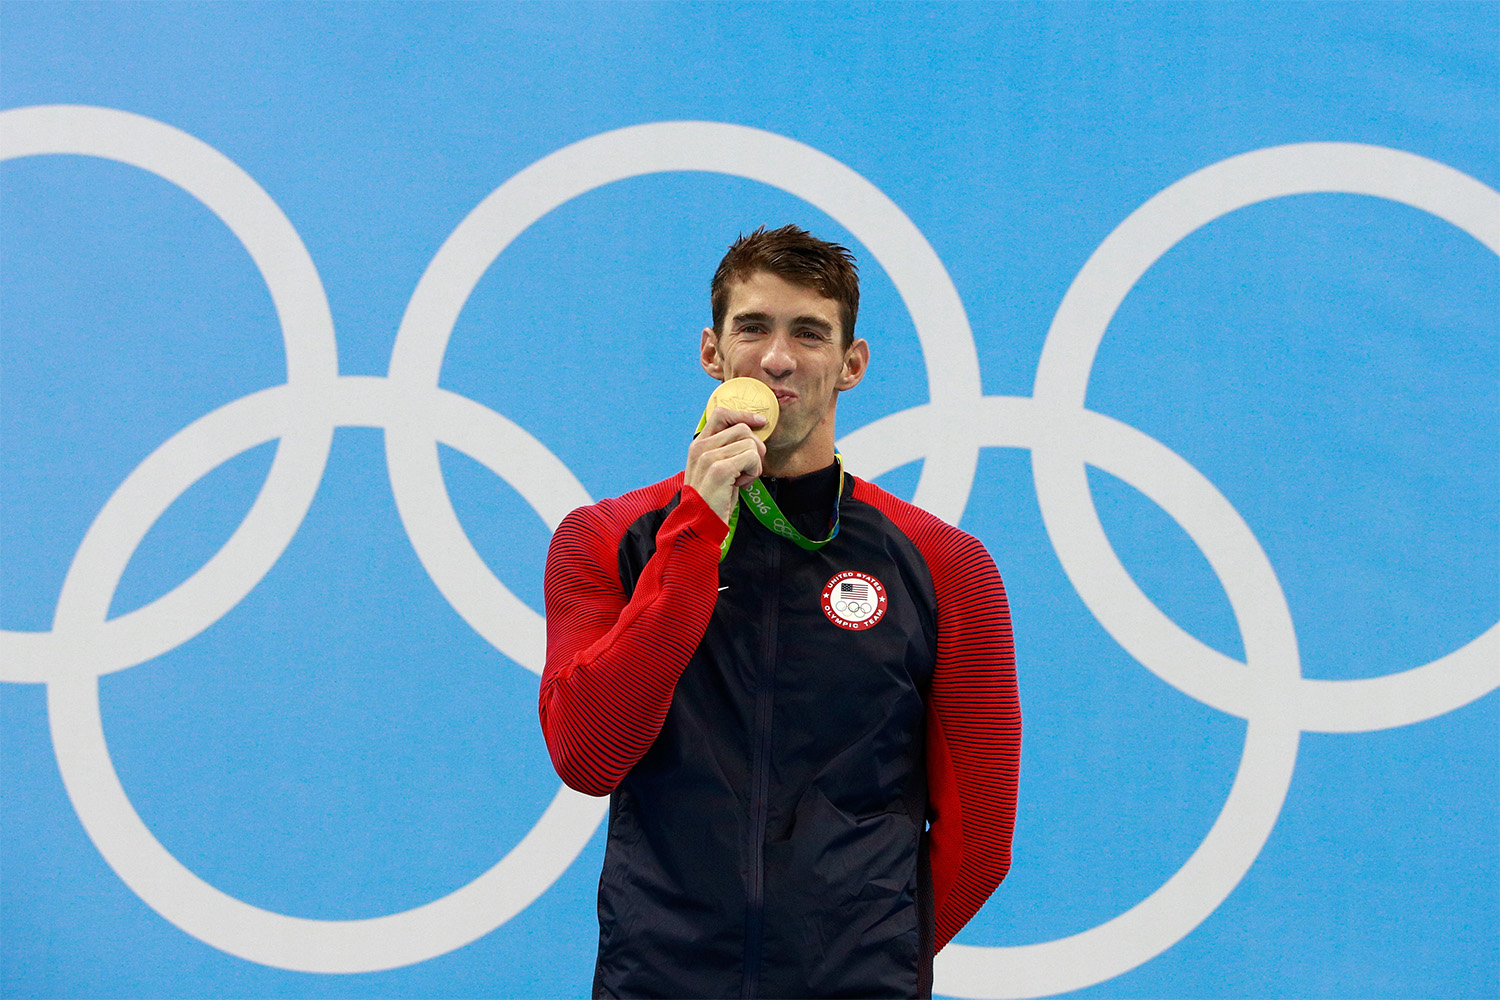 Michael Phelps kissing an Olympic gold medal. Would the record-breaking swimmer even medal in today's Olympics?